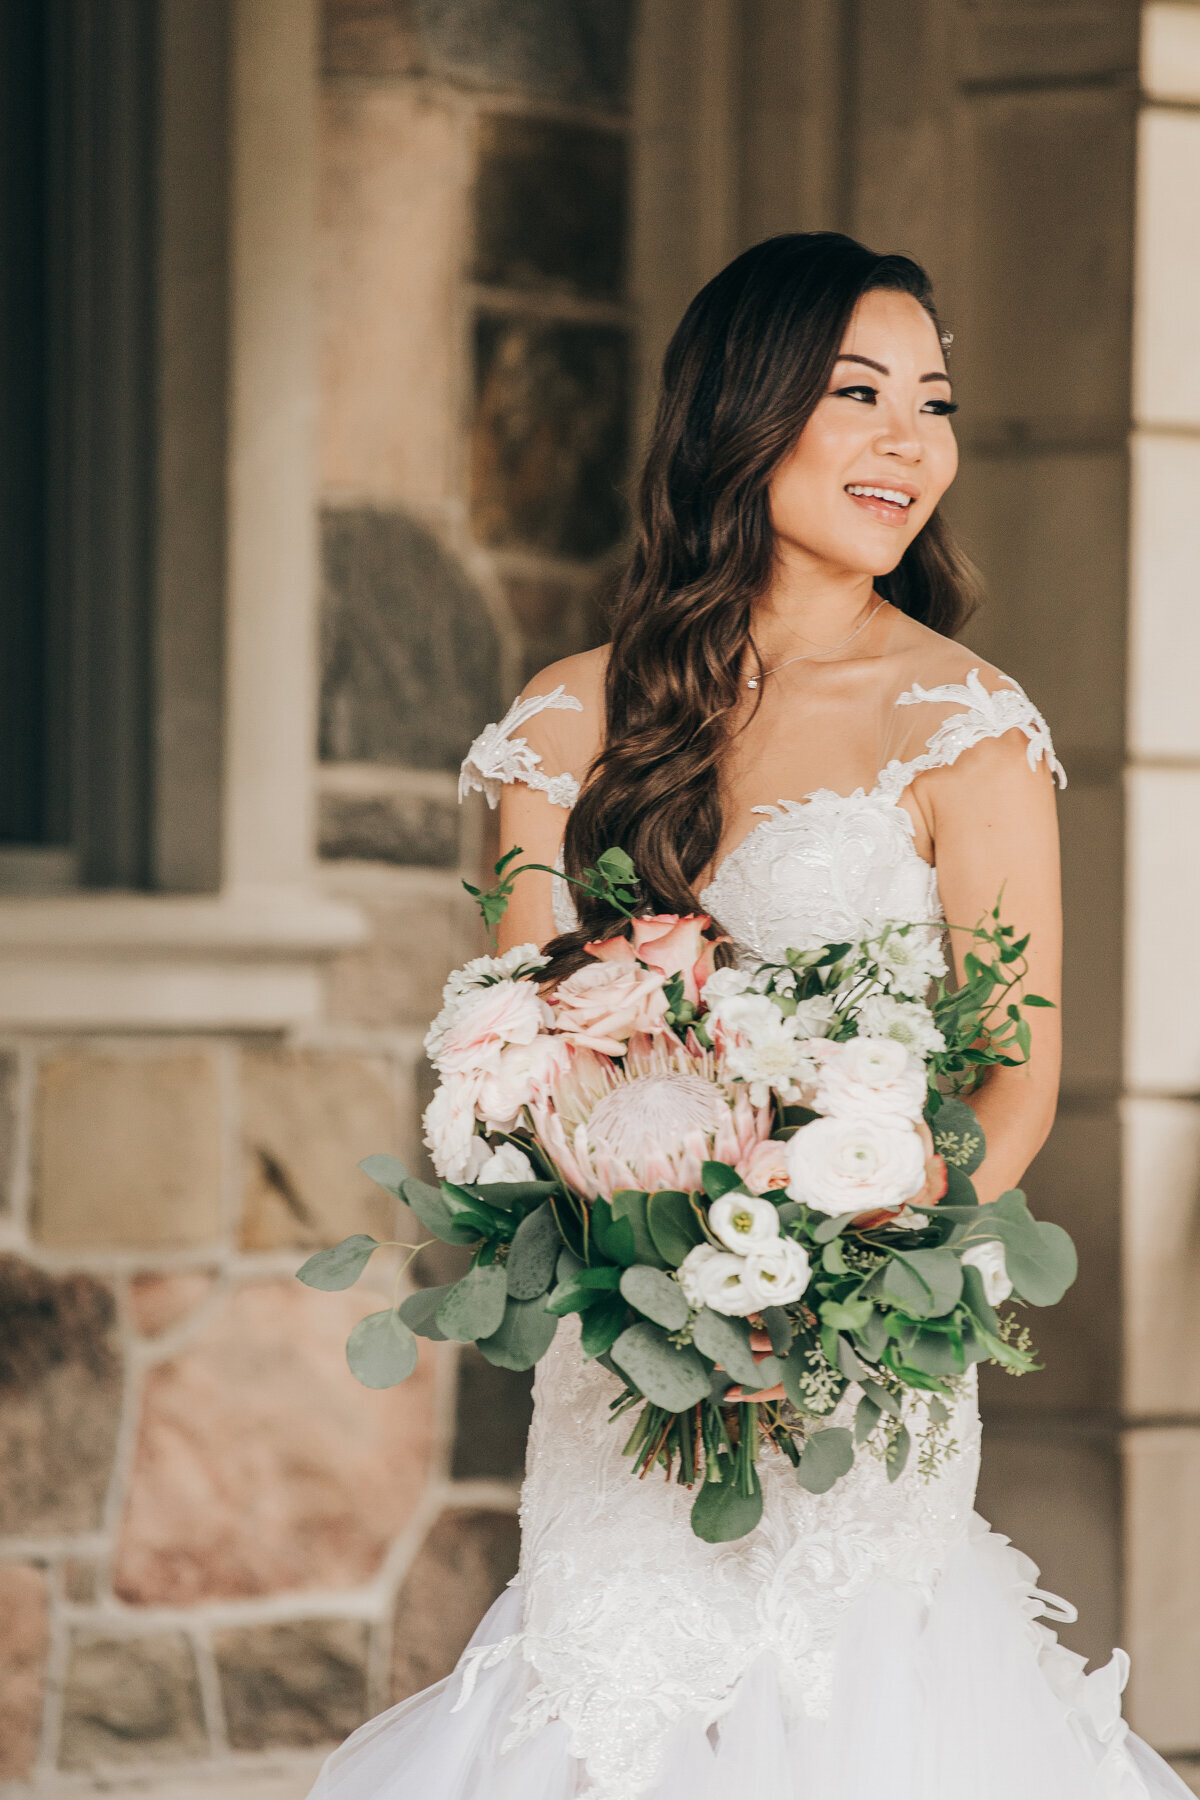 Beautiful bride smiling while holding bouquet of chrysanthemums and eucalyptus